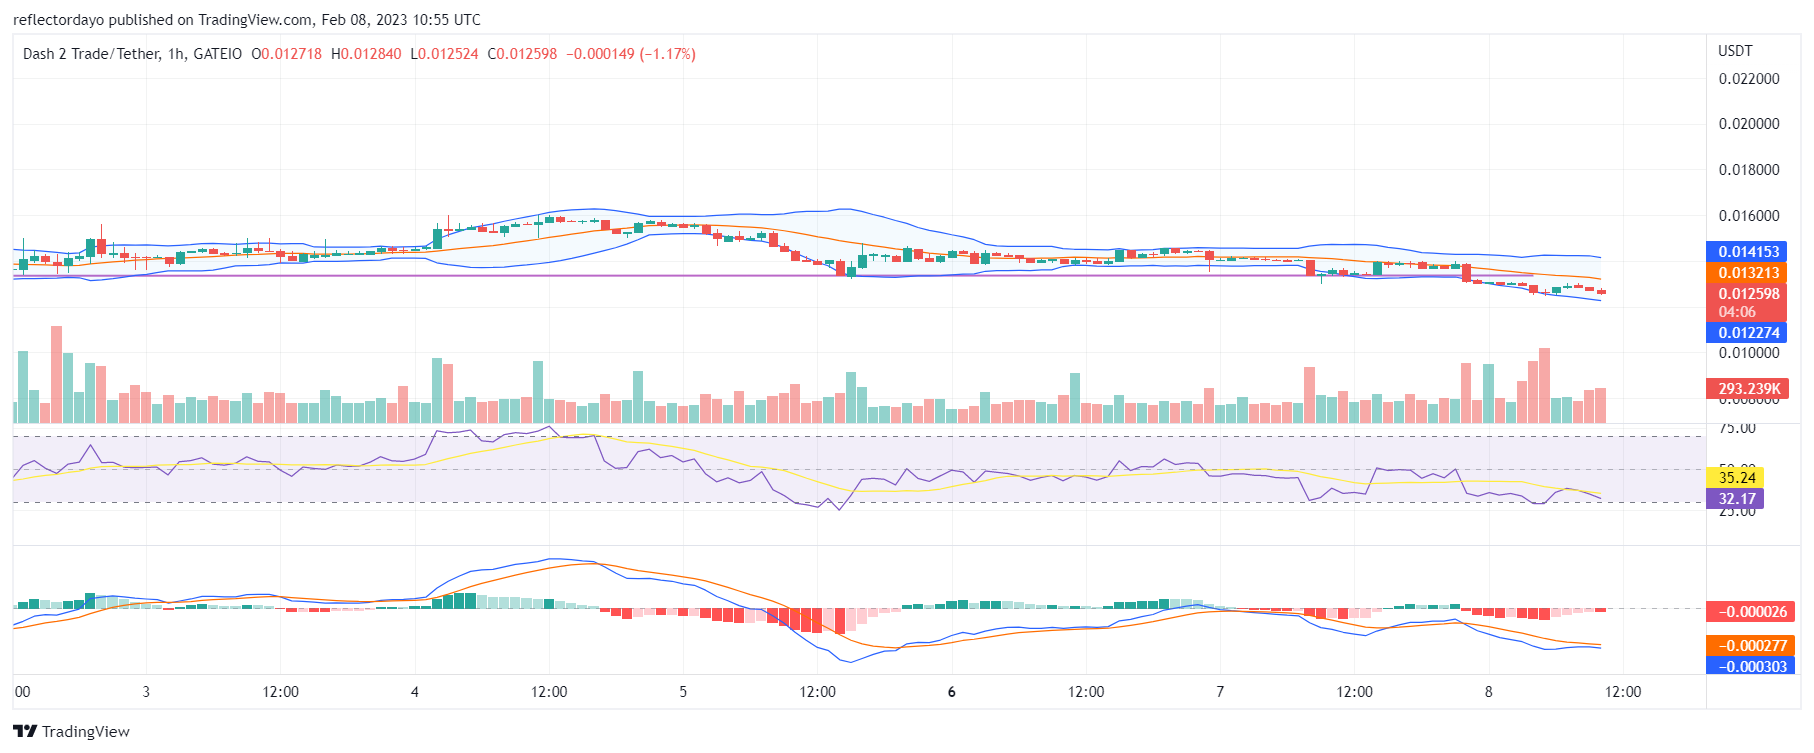 Buy the Dip Now; Dash 2 Trade Price Falls Slightly Below the Key Support Level 